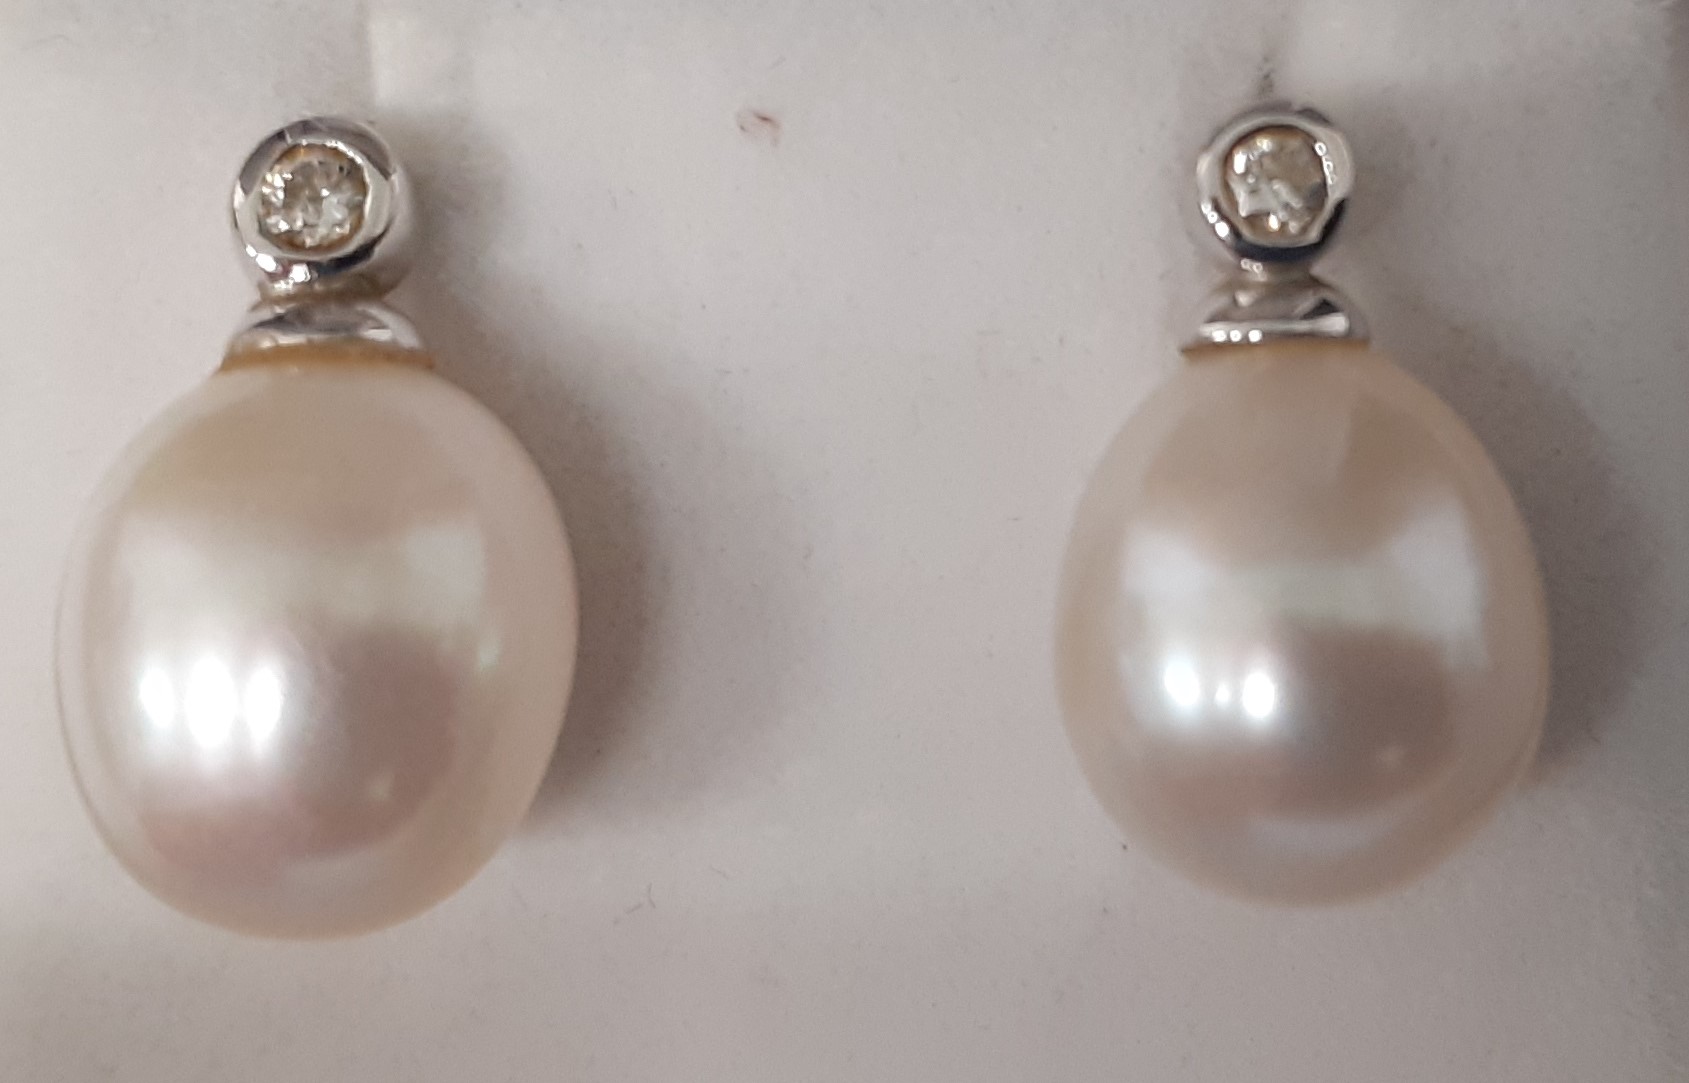 Pair of 18ct white gold, pearl & collet set diamond earrings (marked 750) 3.9g, 10mm pearls - Image 4 of 4